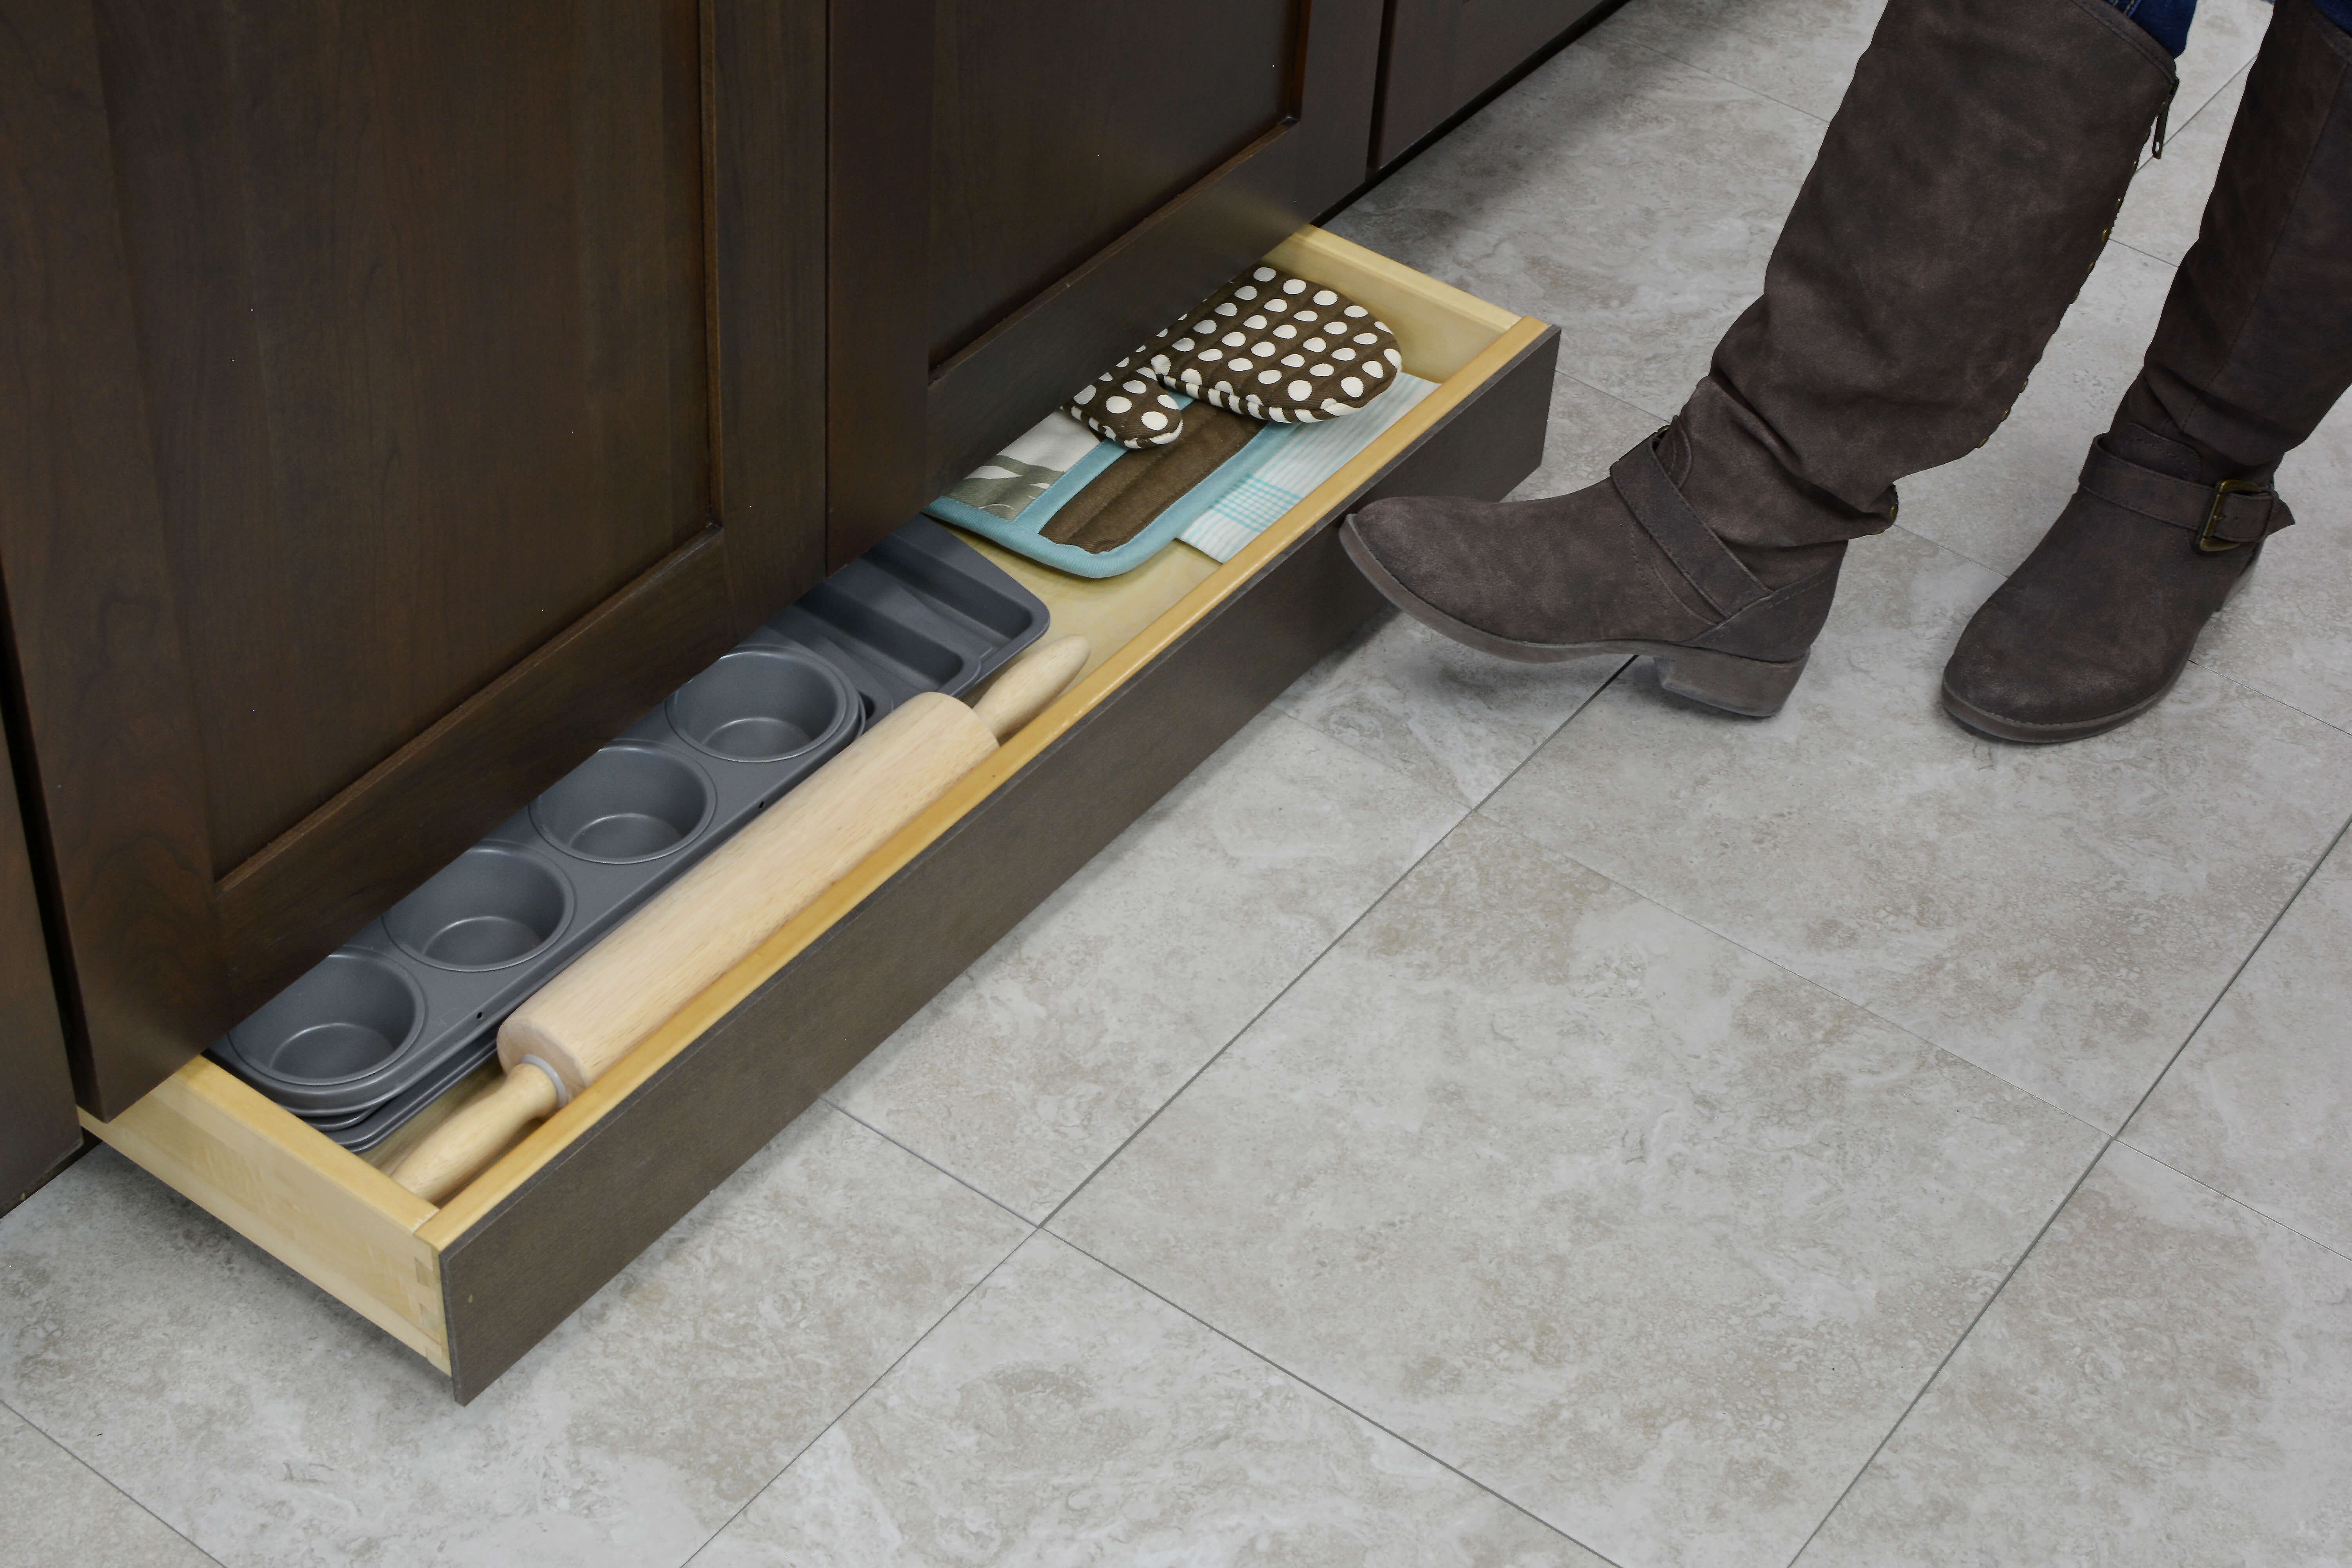 Miscellaneous items can find a home in a Dura Supreme Toe-Kick Drawer hidden at the foot of your cabinets. This convenient solution adds additional storage to your home. It’s great for bakeware, spare oven mitts, rolling pins, cutting boards, and so much more!